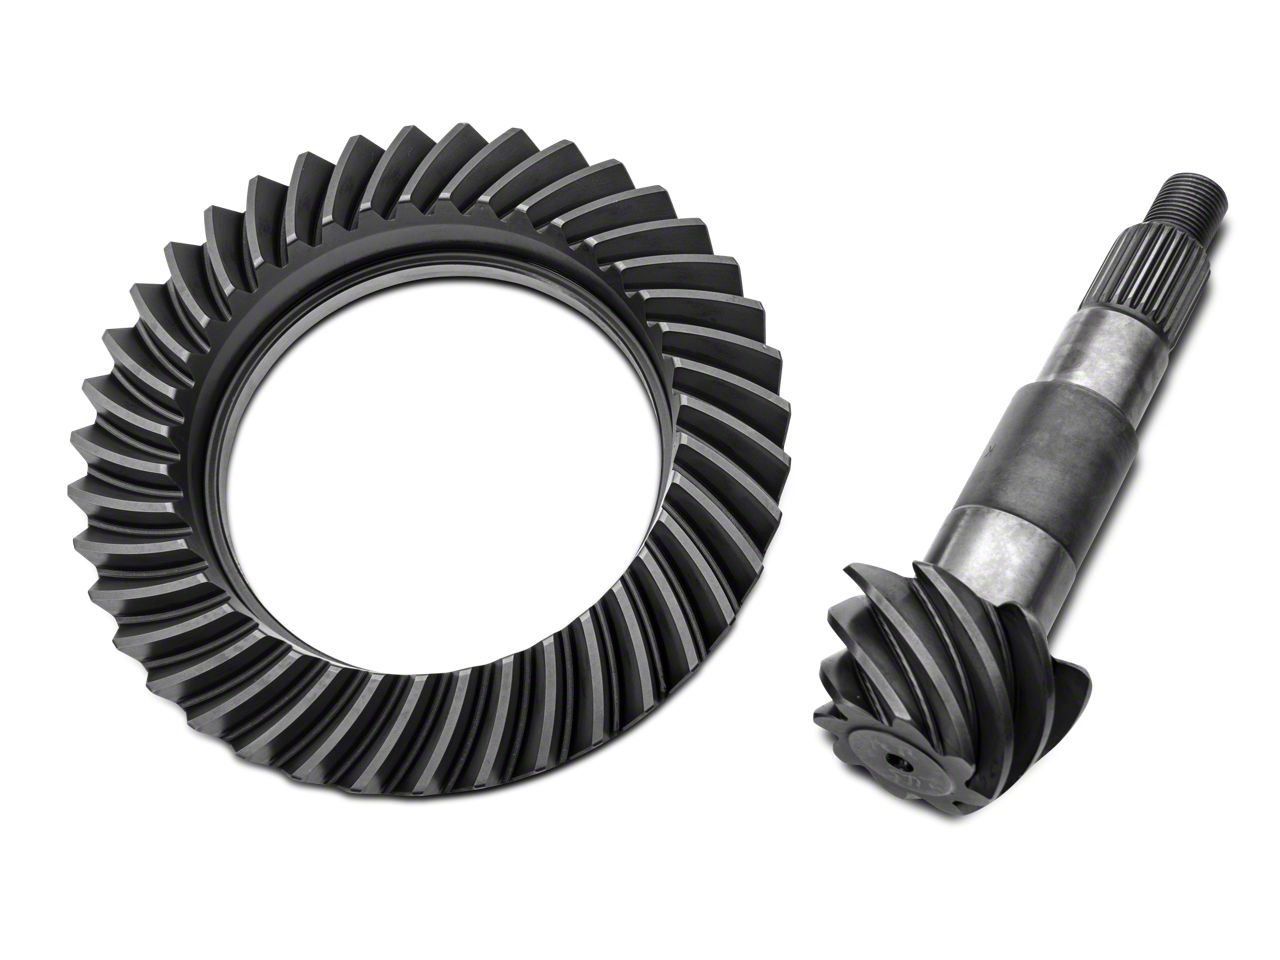 Jeep Ring & Pinion Gears